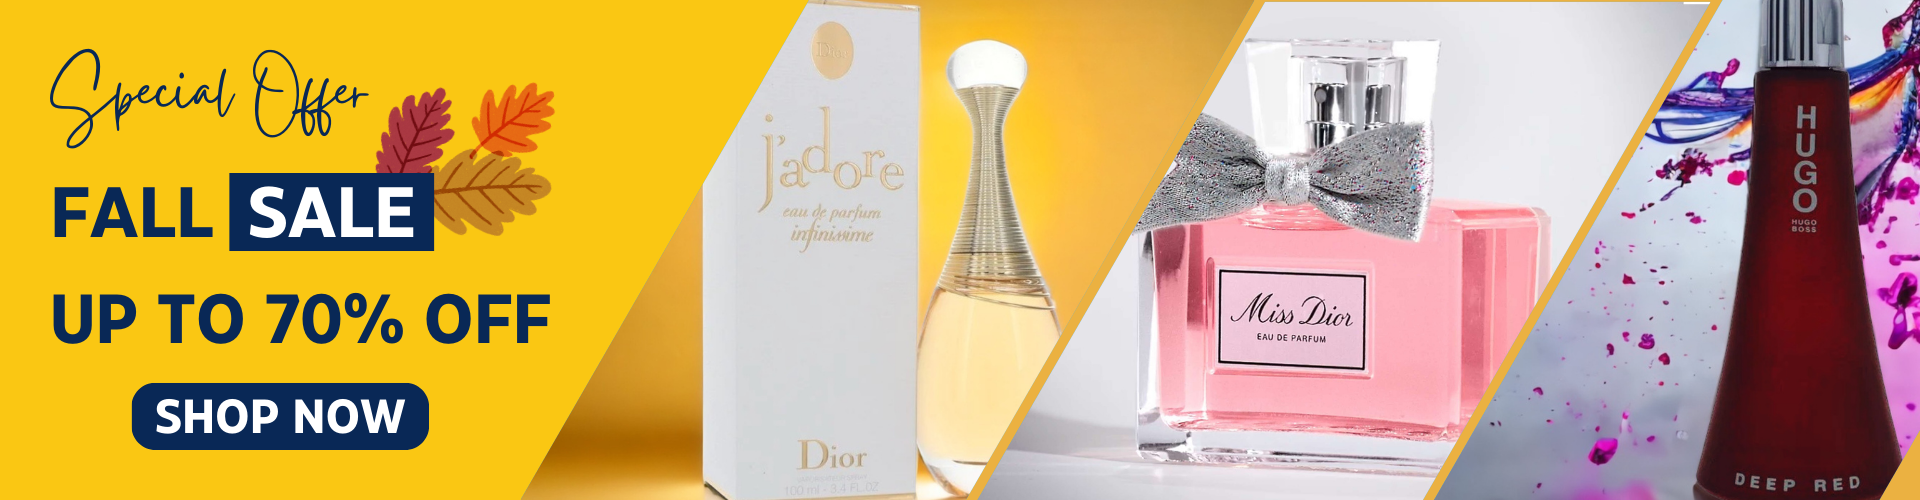 Jadore+Perfume+by+Christian+Dior+3.4+Oz+EDP+100+Authentic+WN+Spray+Tester  for sale online